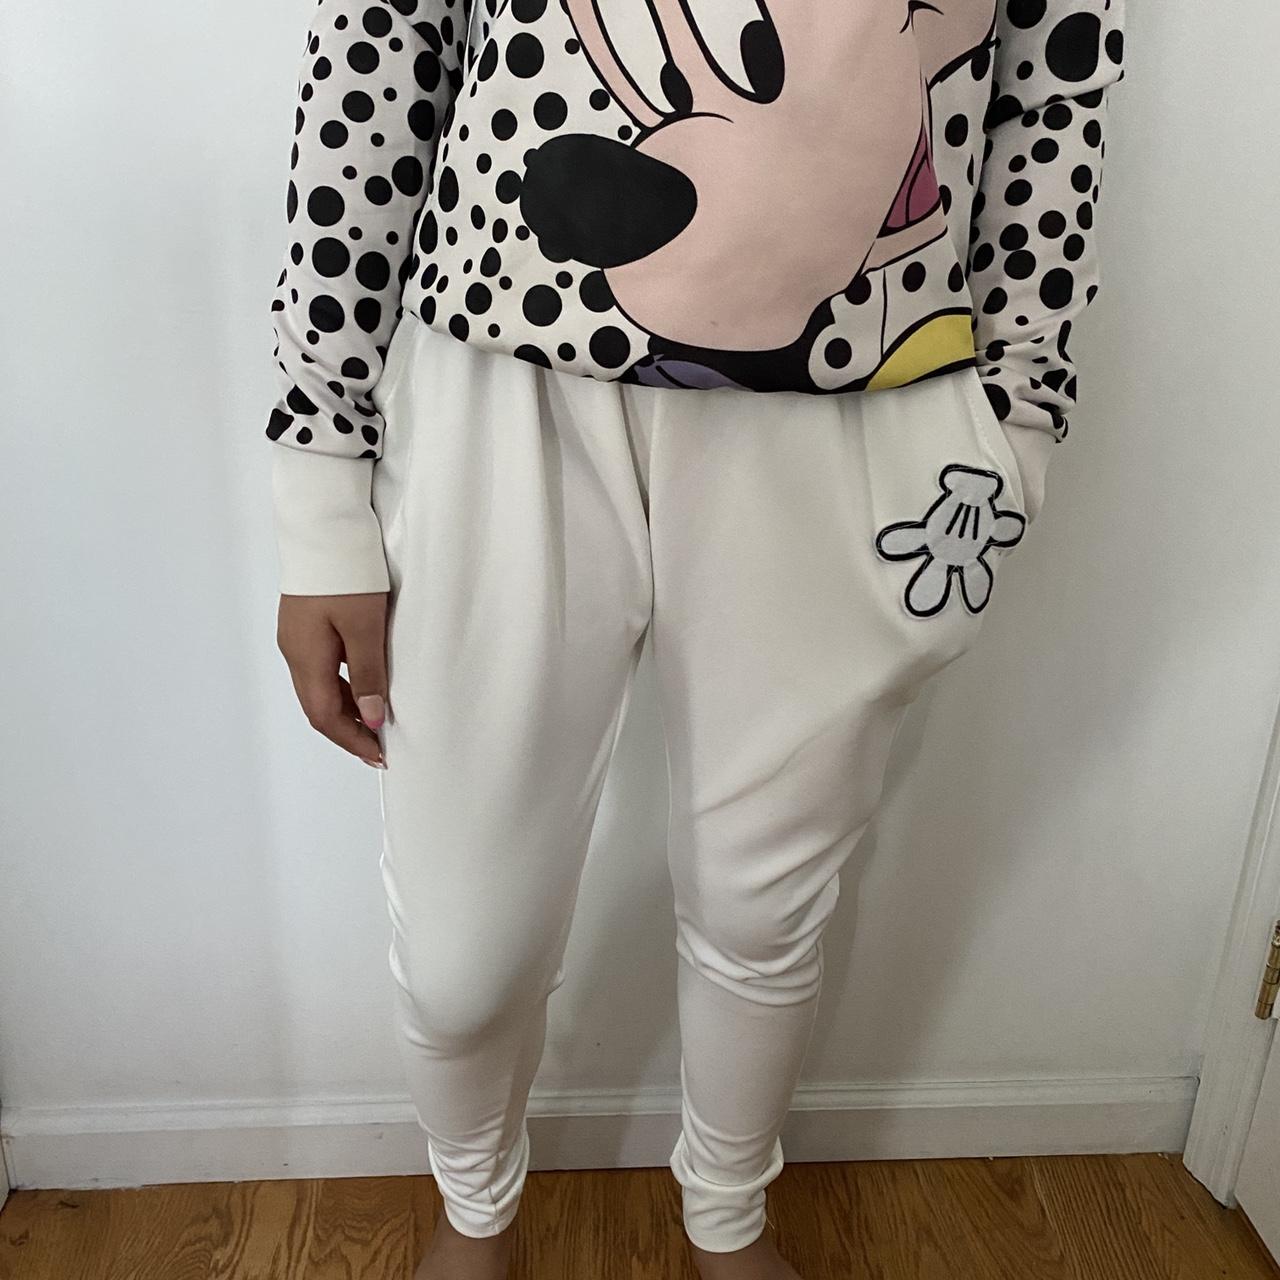 MINNIE MOUSE HOODIE AND SWEATPANTS SET - cute for a - Depop